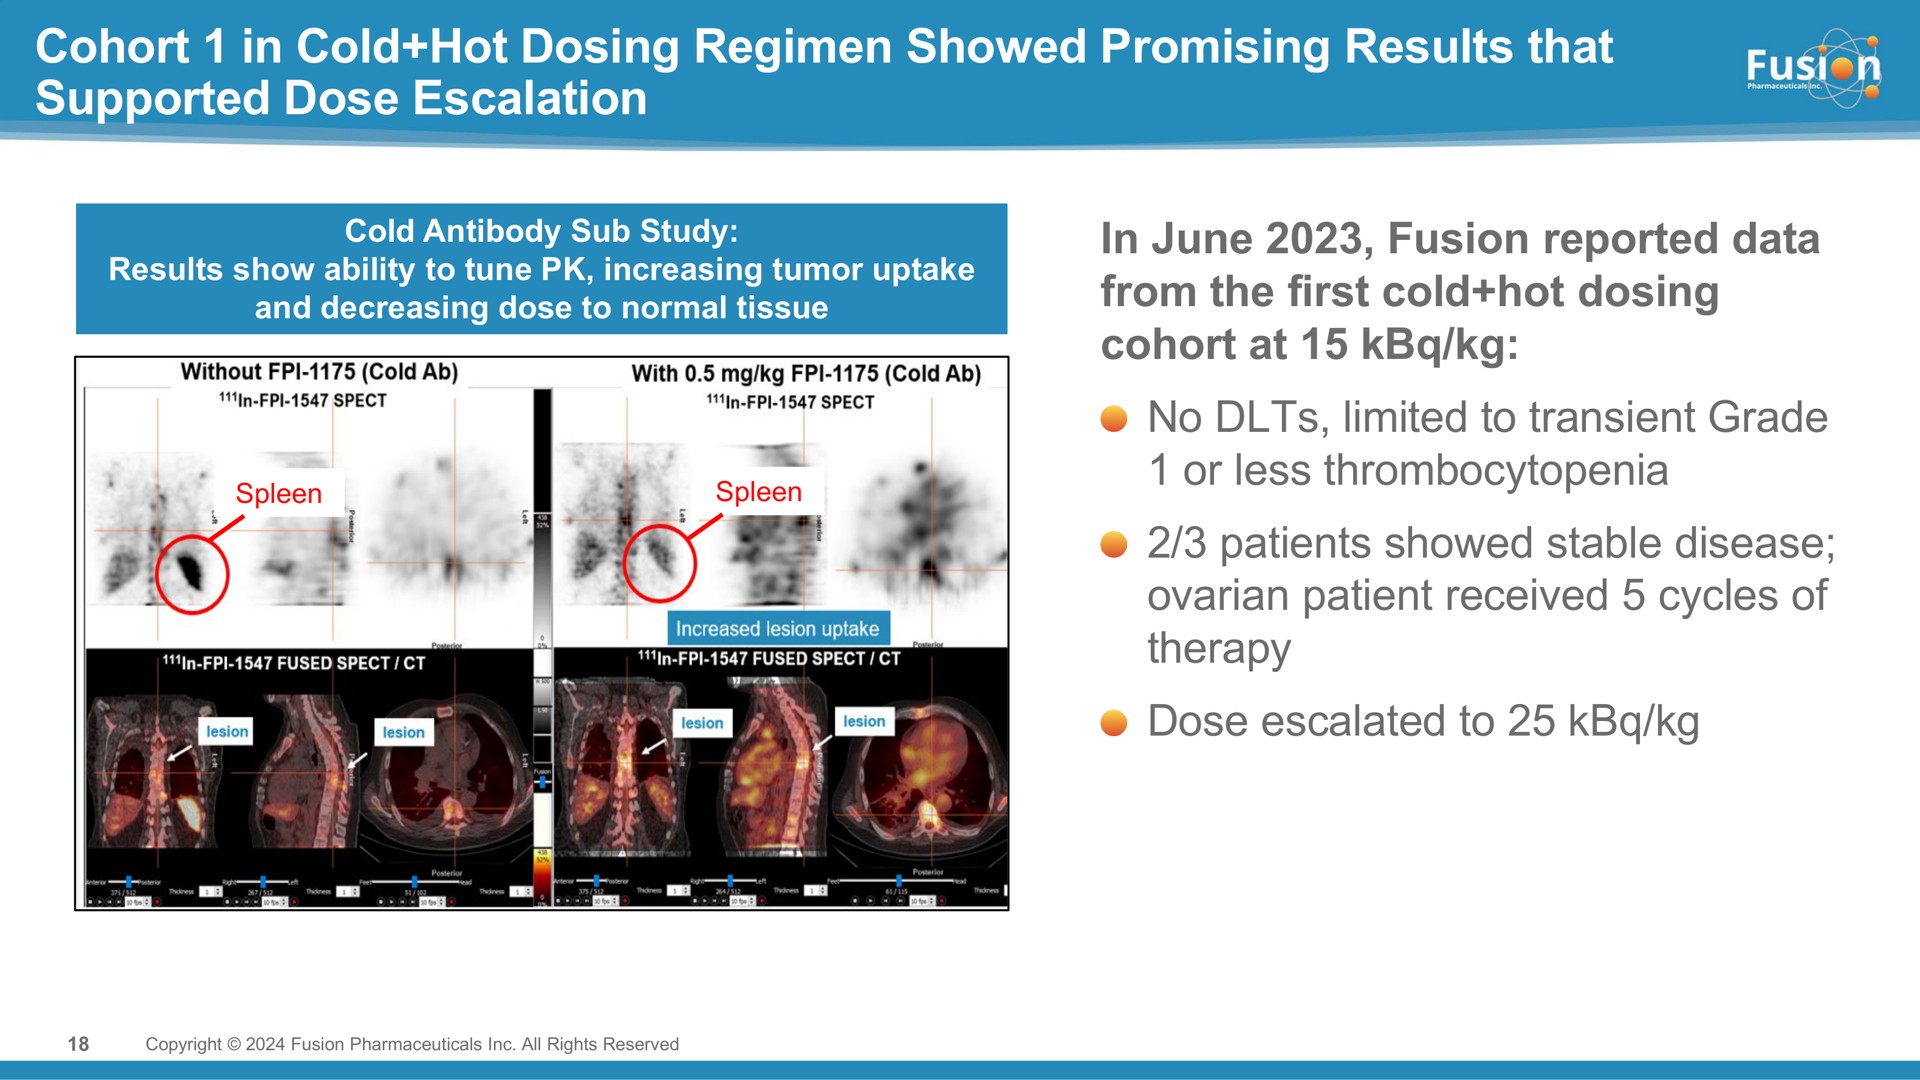 cohort in cold hot dosing regimen showed promising results that supported dose in june fusion reported data from the first cold hot dosing cohort at no limited to transient grade or less thrombocytopenia patients showed stable disease ovarian patient received cycles of therapy dose escalated to | Fusion Pharmaceuticals